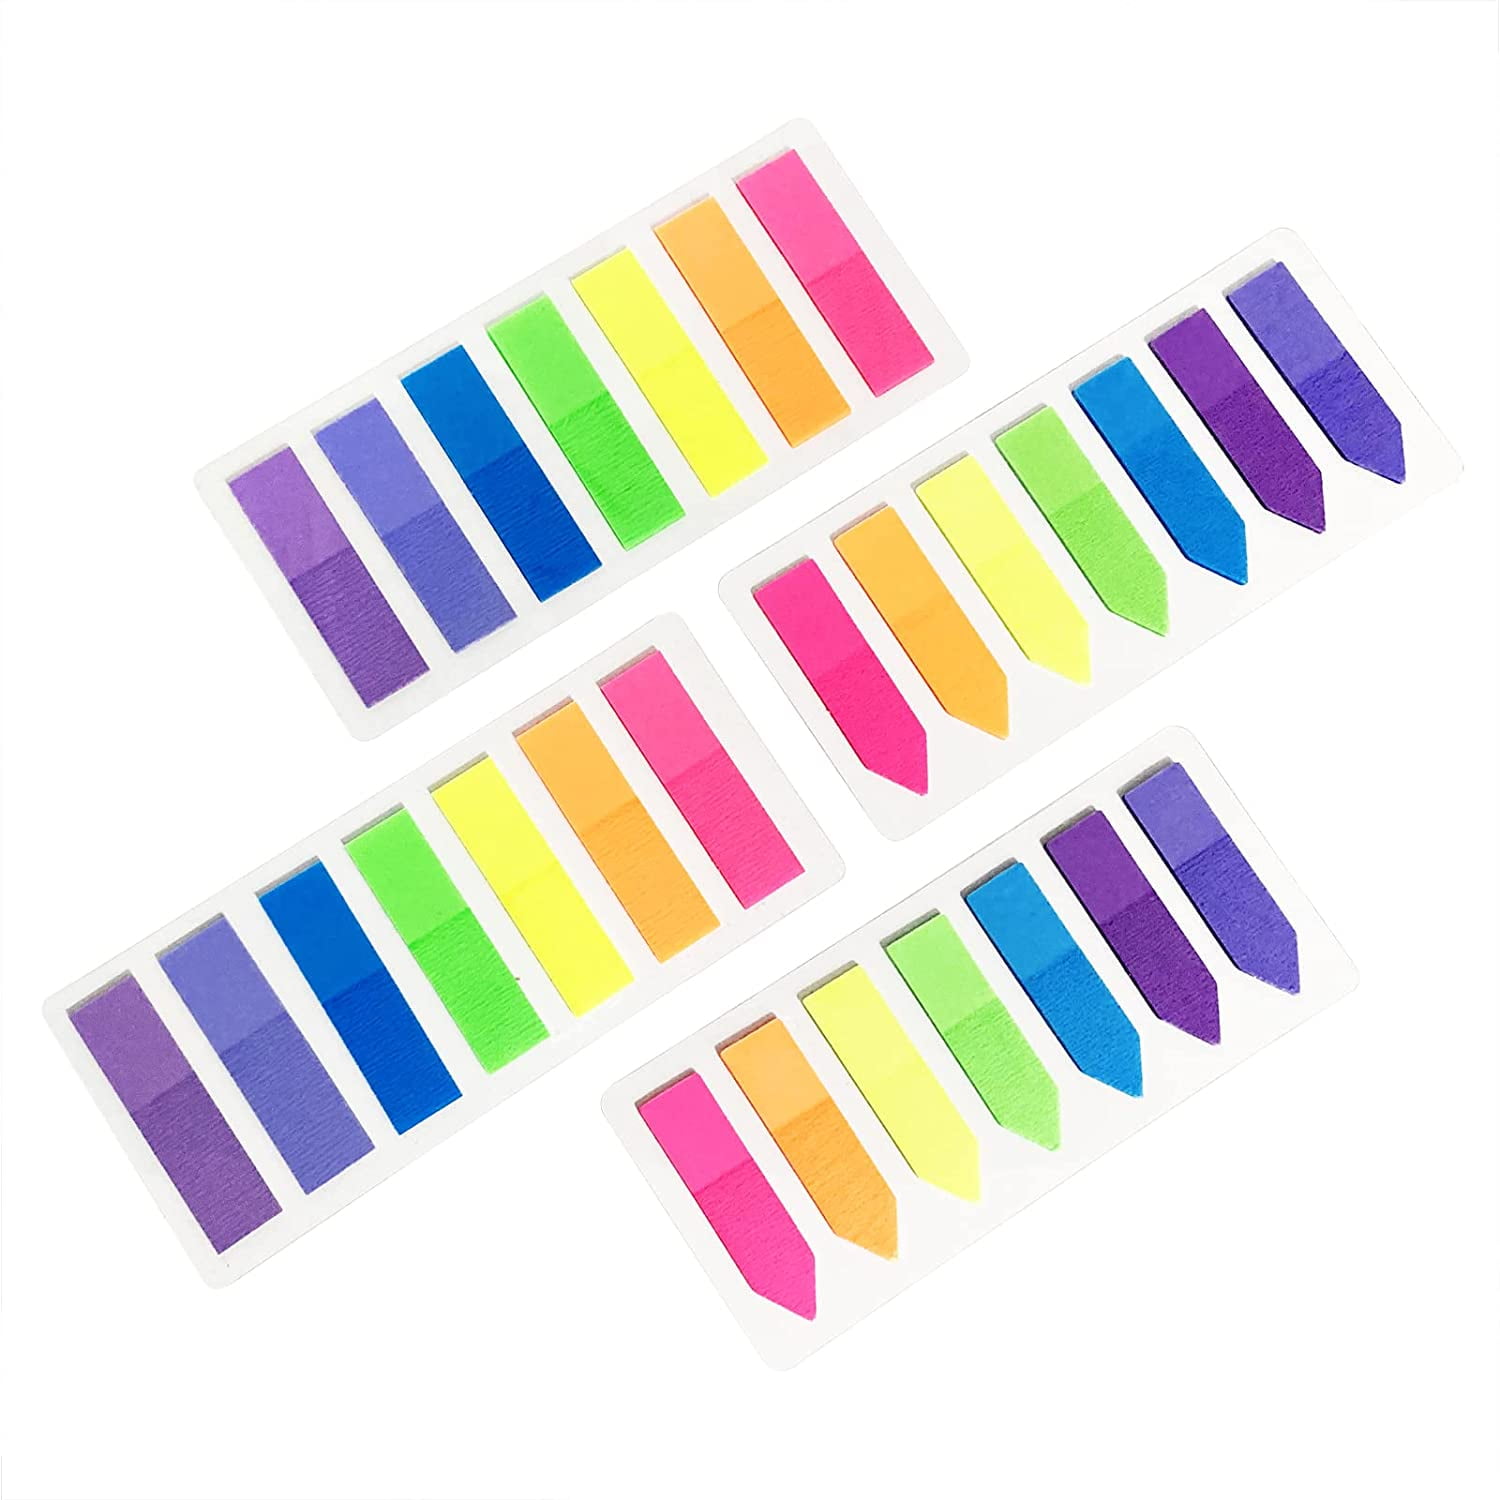 KICNIC Page Markers Colored Sticky Tabs 1600 Pcs, Translucent Arrow Flags  for Page Marking, Fluorescent Index Tab Stickers for Notebooks, Small  Sticky